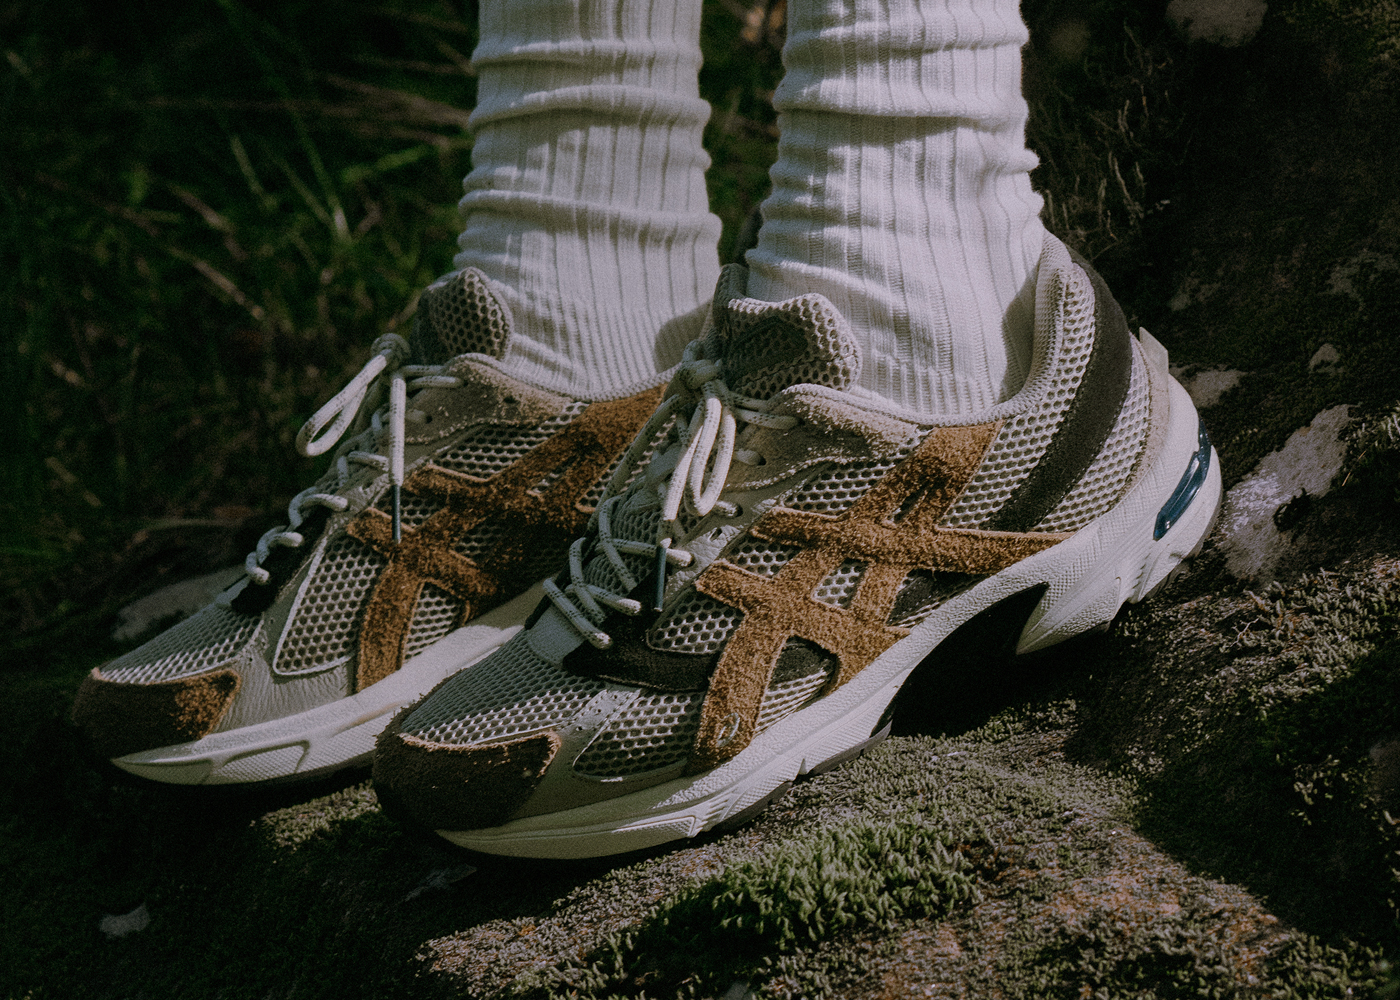 Interview: Highs And Lows Explain the HAL Studios x ASICS